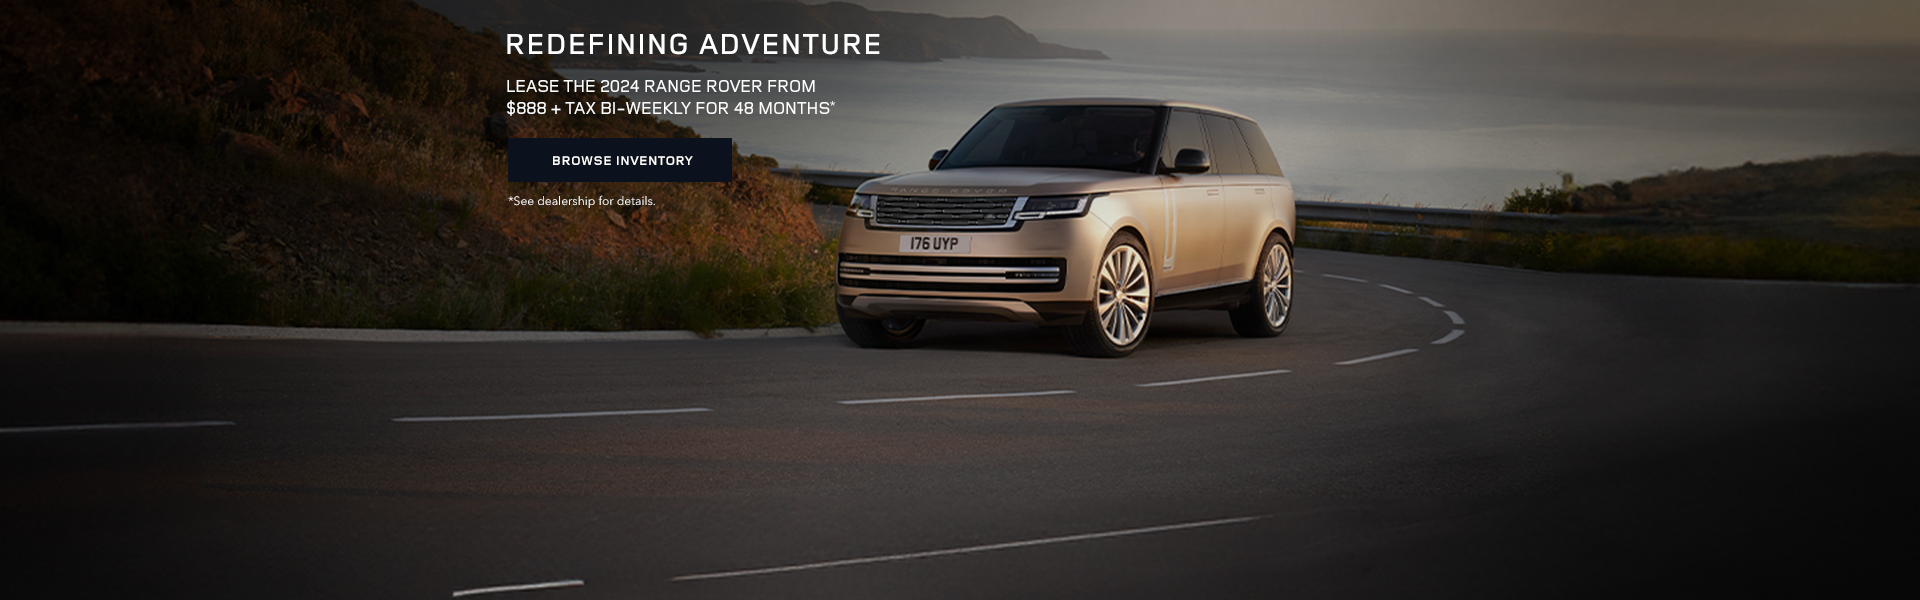 Monthly Offers - Range Rover